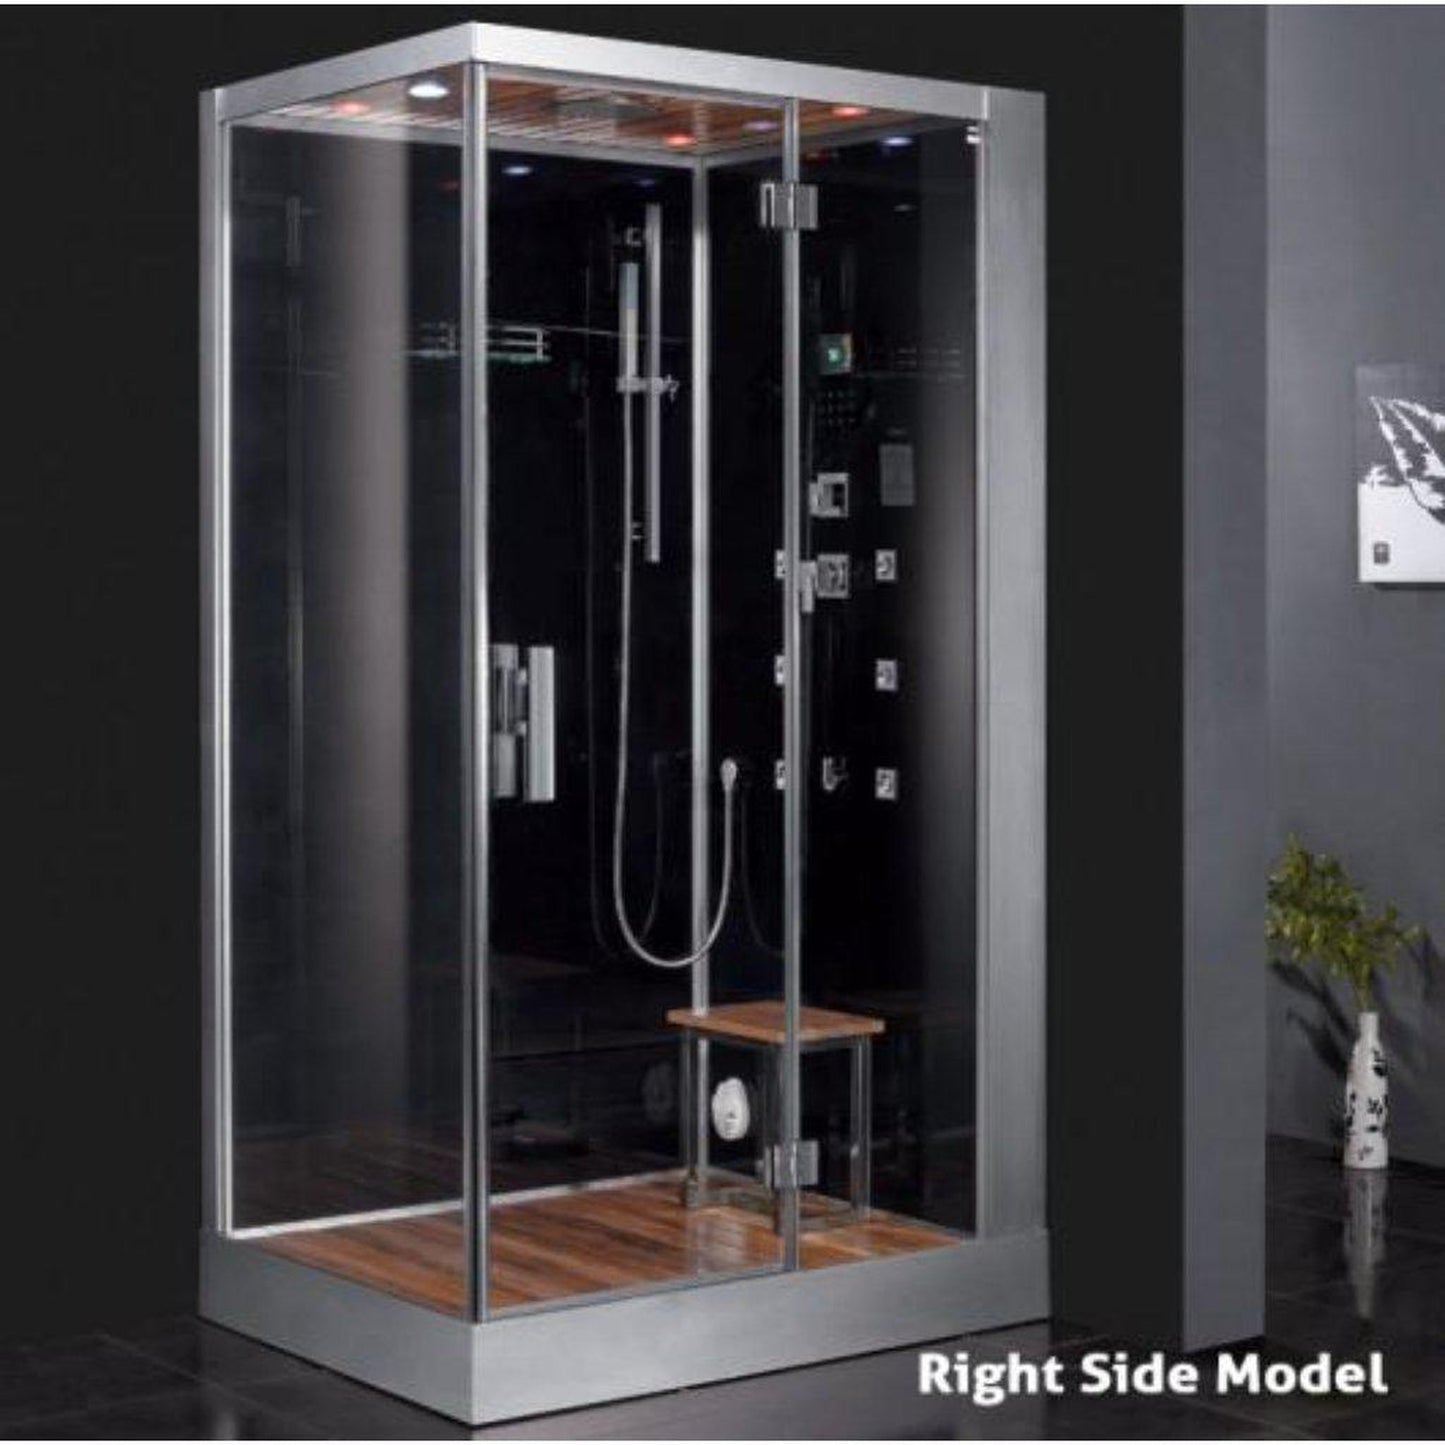 Platinum 47" x 35" x 89" Two-Person Black Framed Rectangle Walk-In Steam Shower With Right Handed Control Panel Configuration Hinged Door 6 Massage Jets & LED Chromatherapy Lighting